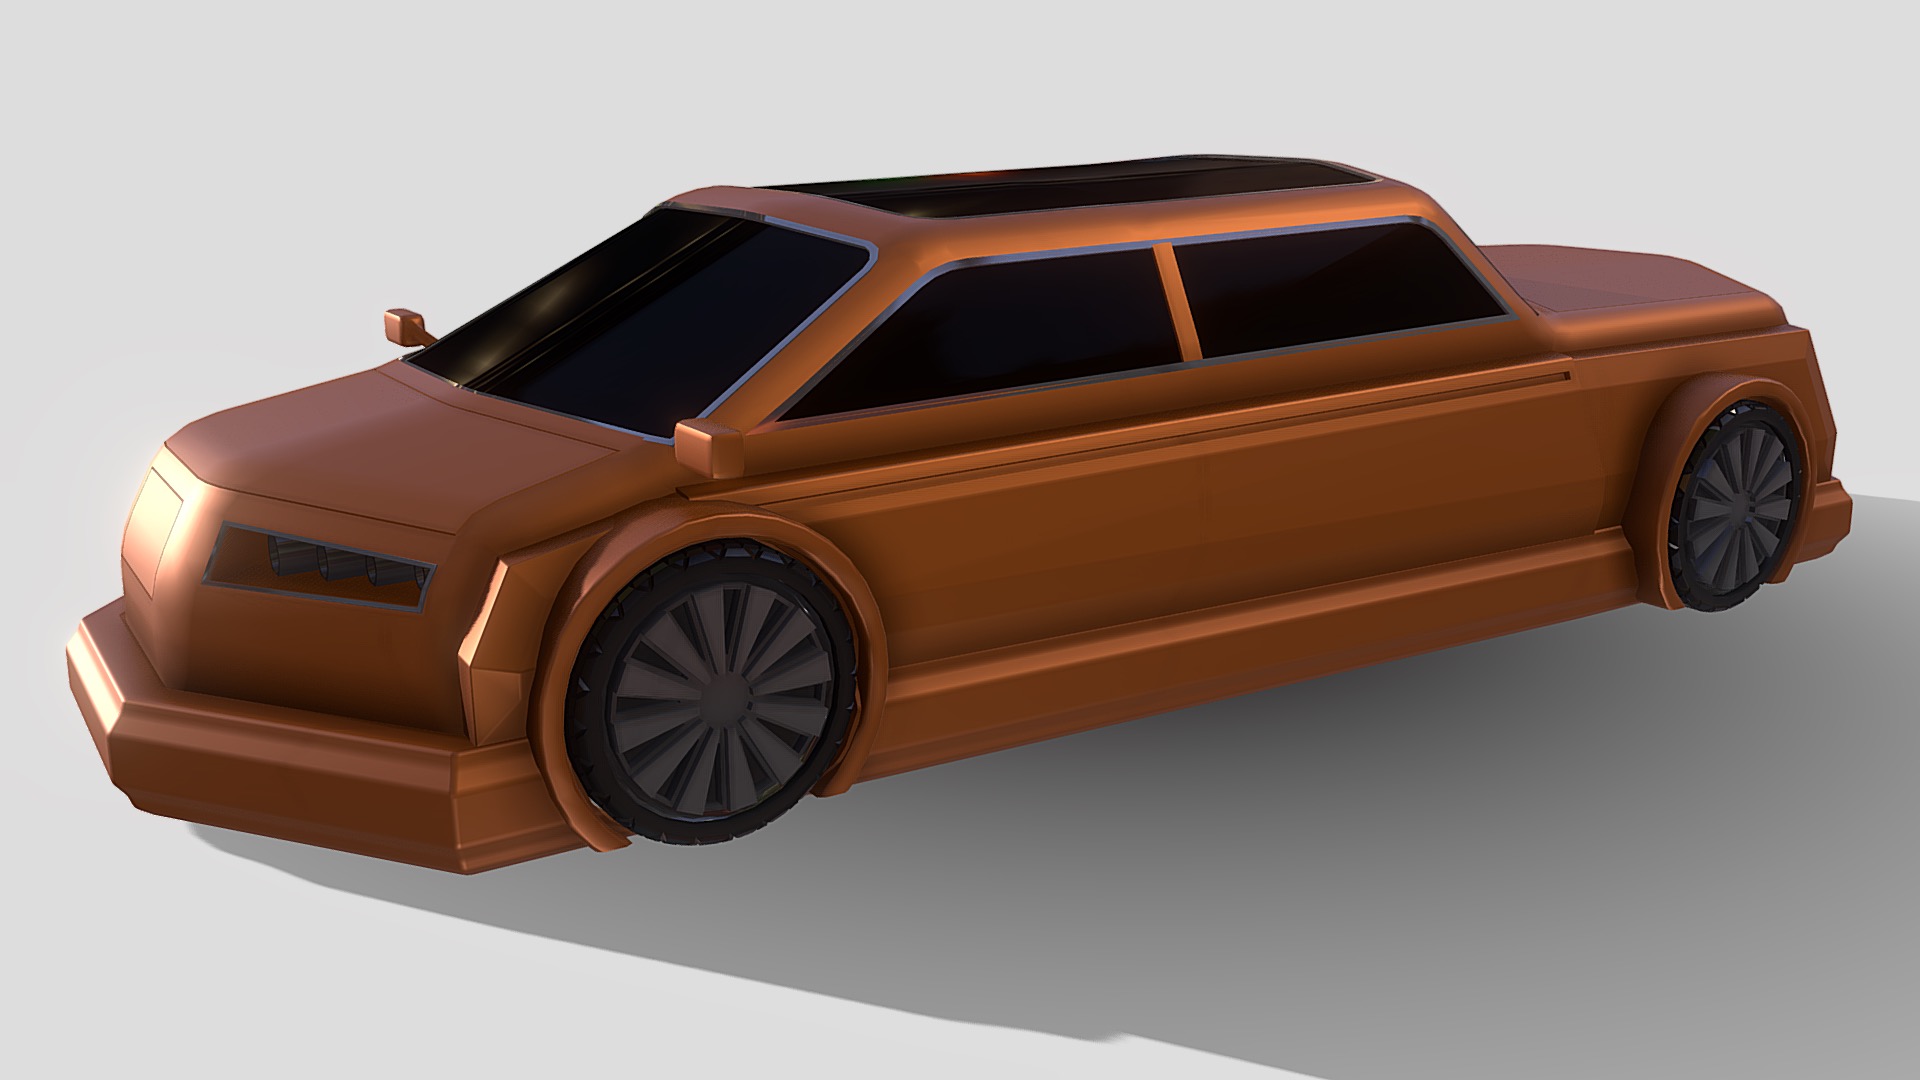 3D model Toon Car 3 - This is a 3D model of the Toon Car 3. The 3D model is about a brown car with a white background.